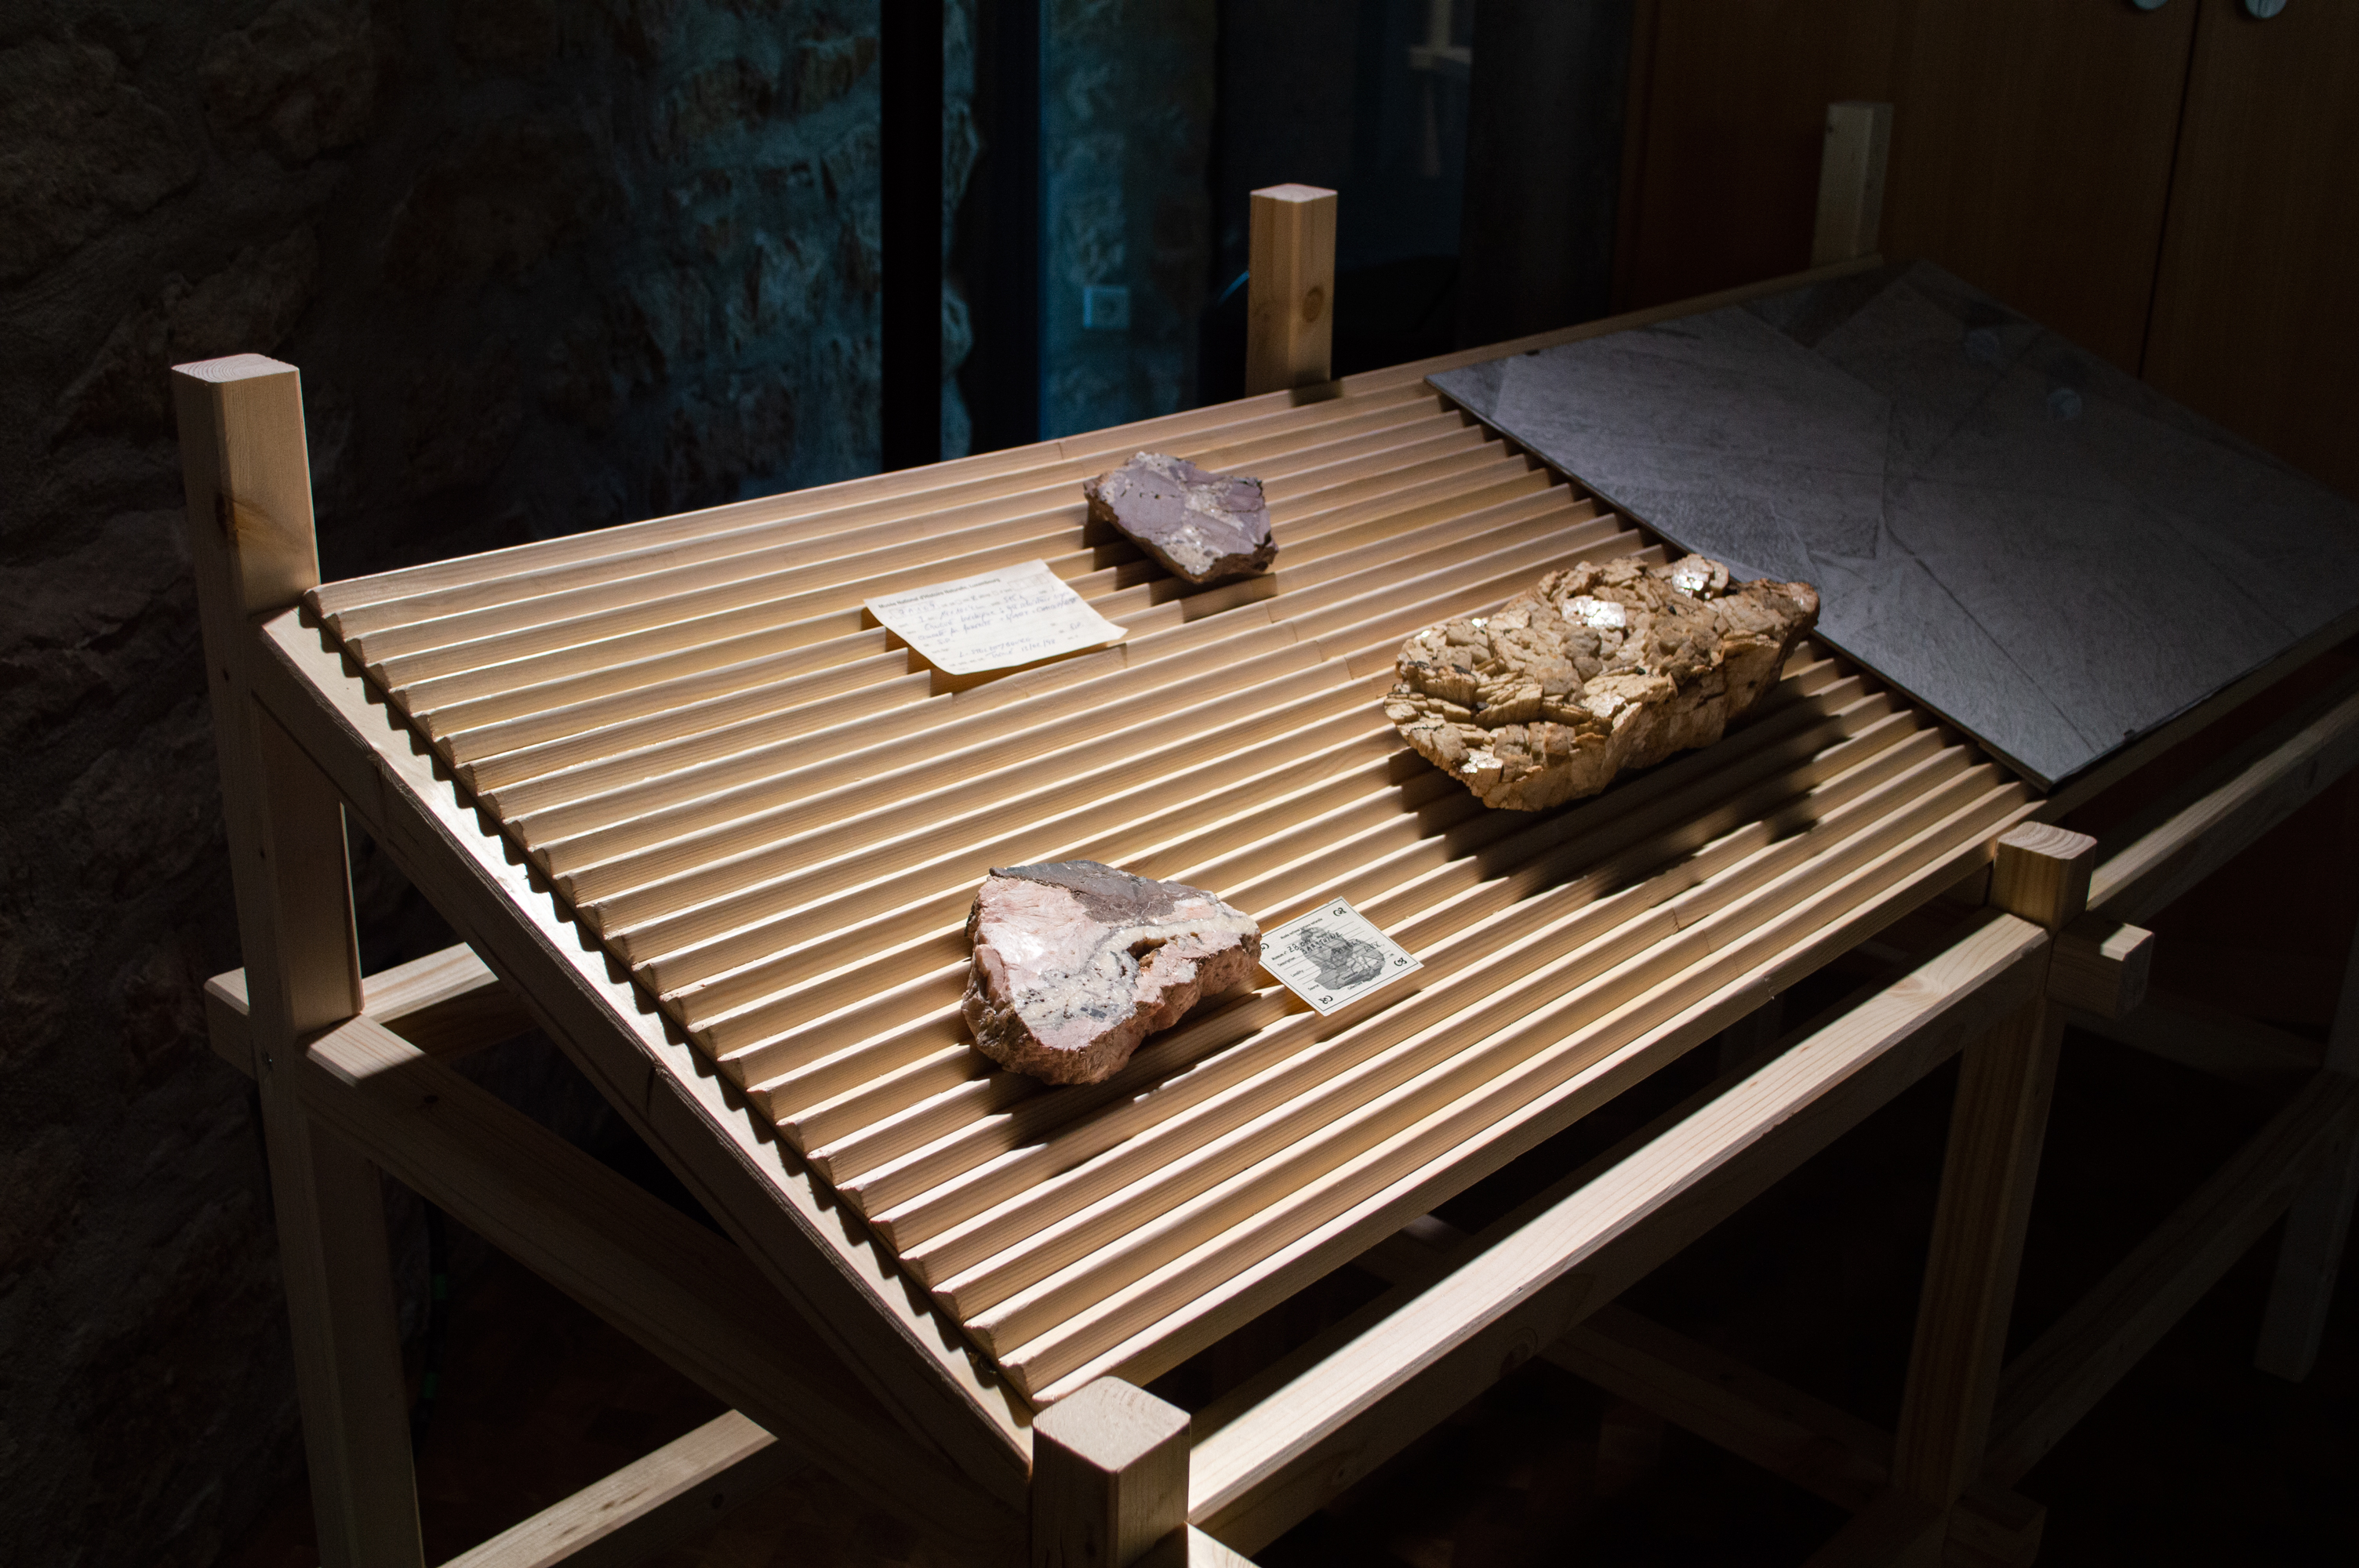 Fantômes de roches - Rock Ghosts, Installation composed of an edition, drawings, glass engravings, slide projections & wooden modules (spruce) with samples from the geological collections of the RBINS, (Module design/scenography: Kieran Young), 2022. With the support of WBI and ISELP